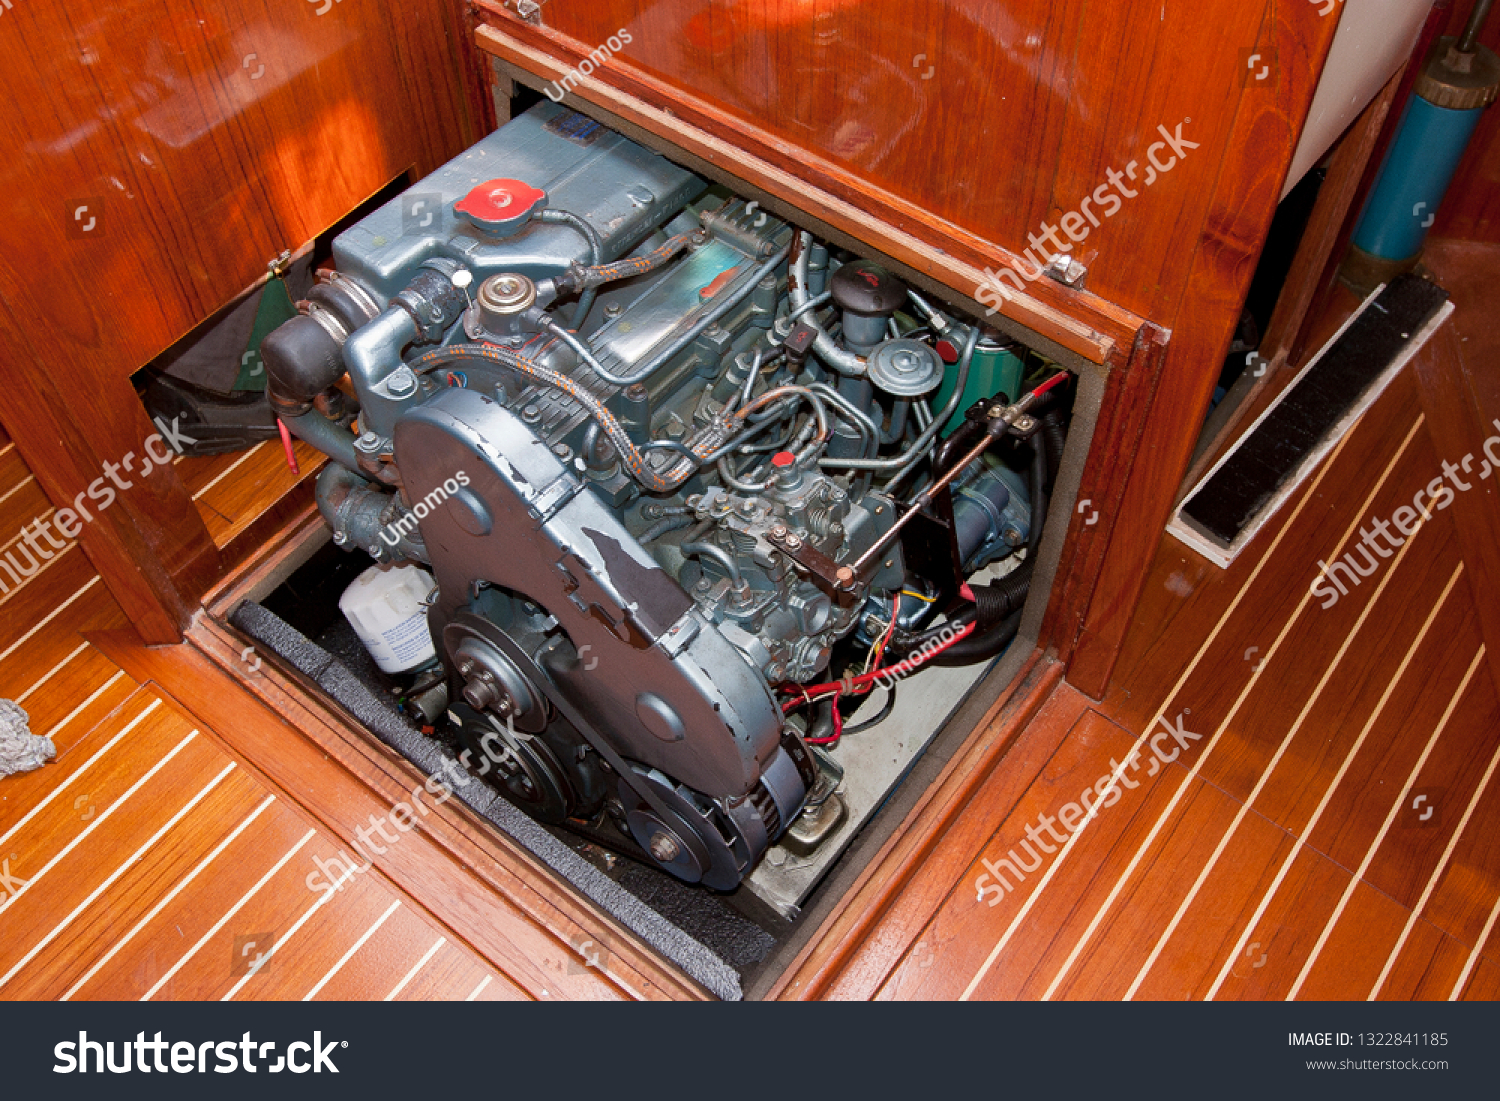 Inboard engine on a saling yacht #1322841185